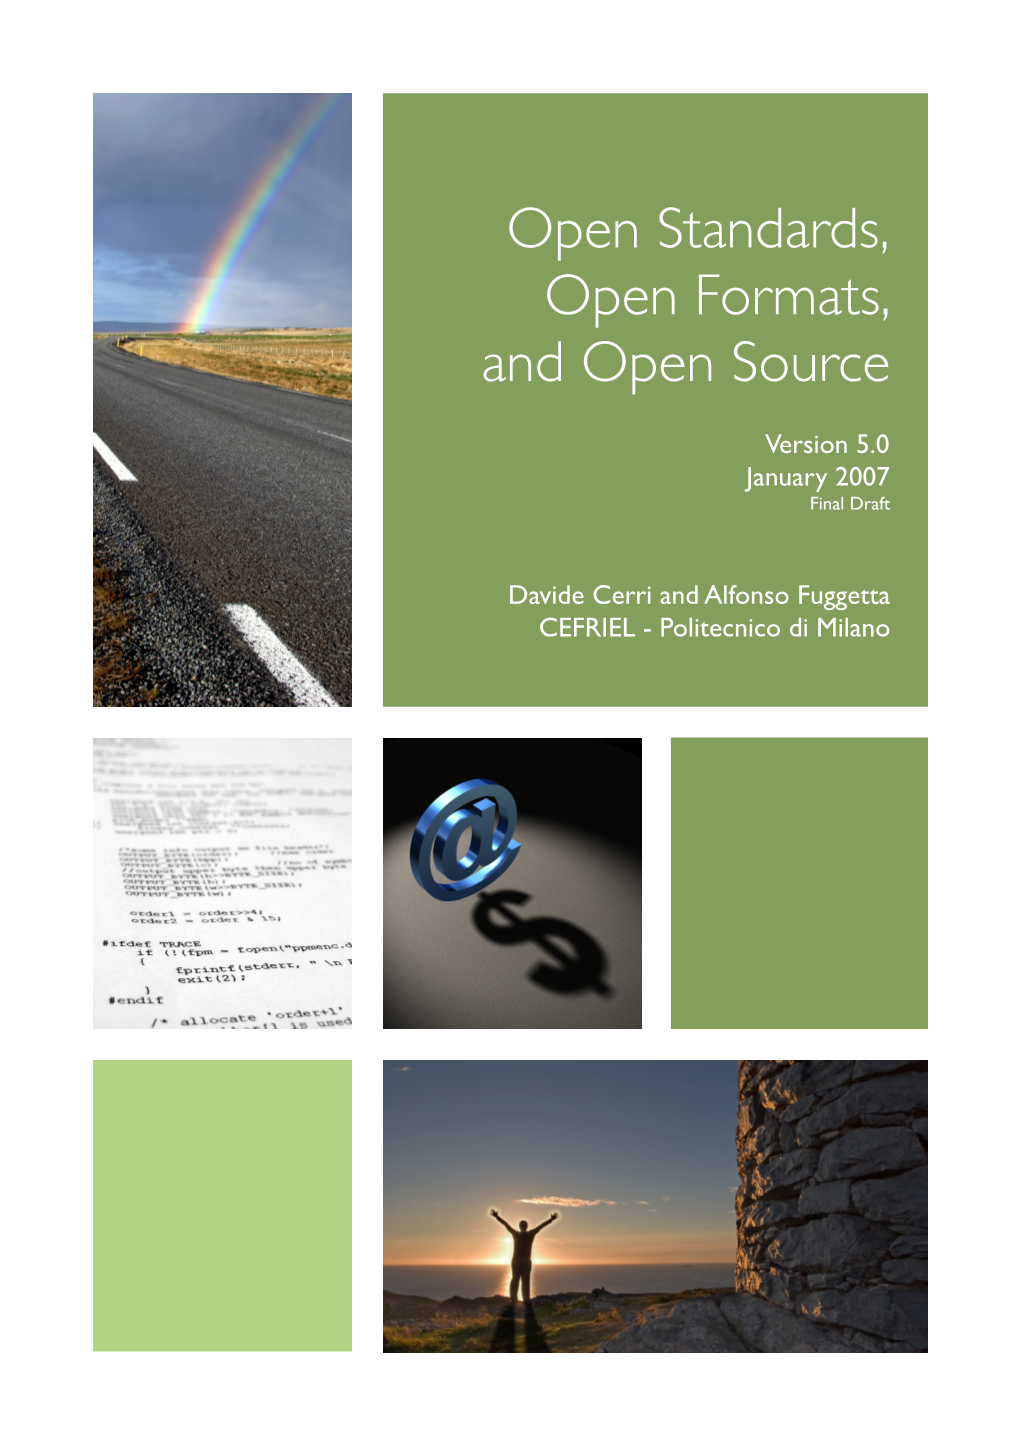 Open Standards, Open Formats, and Open Source